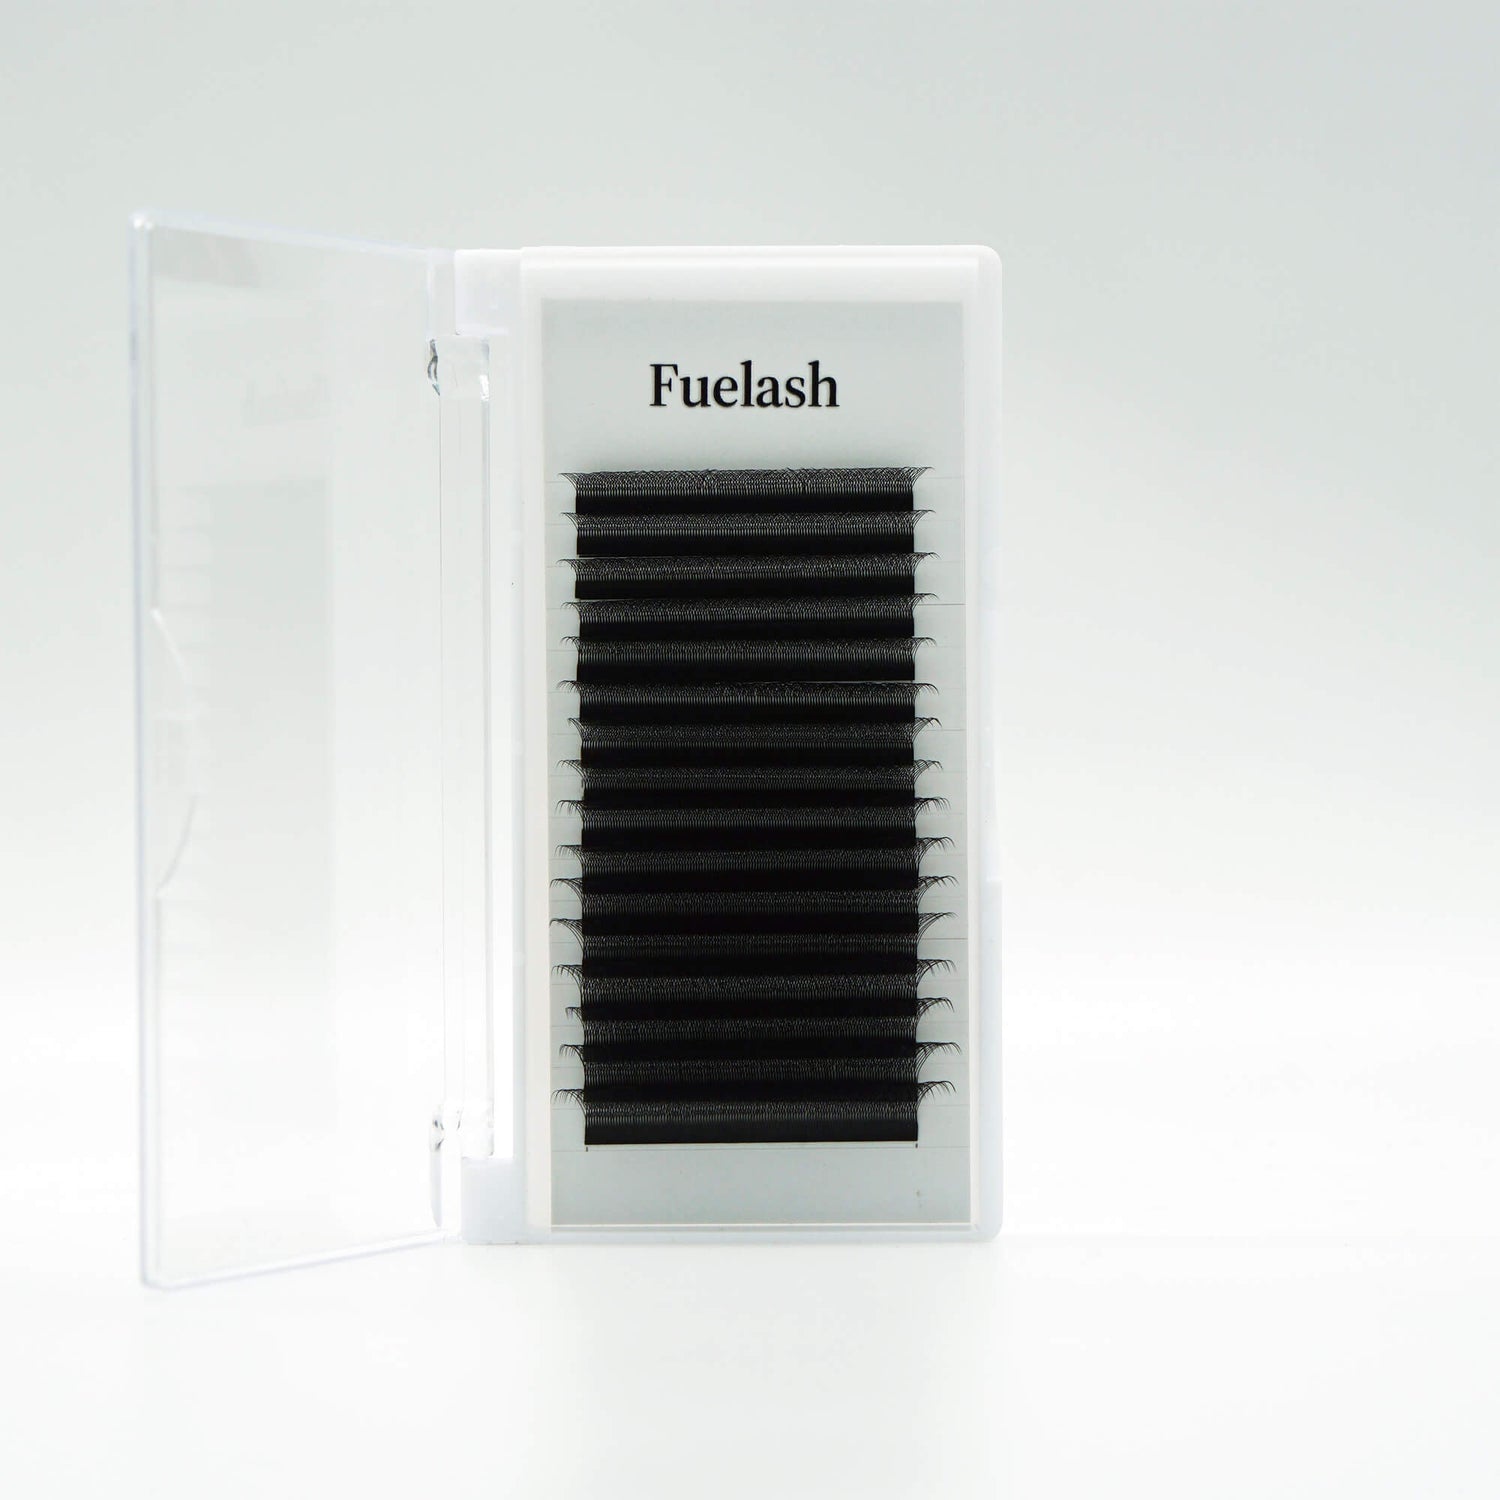 W Style 5D Premade Volume Fan Lashes